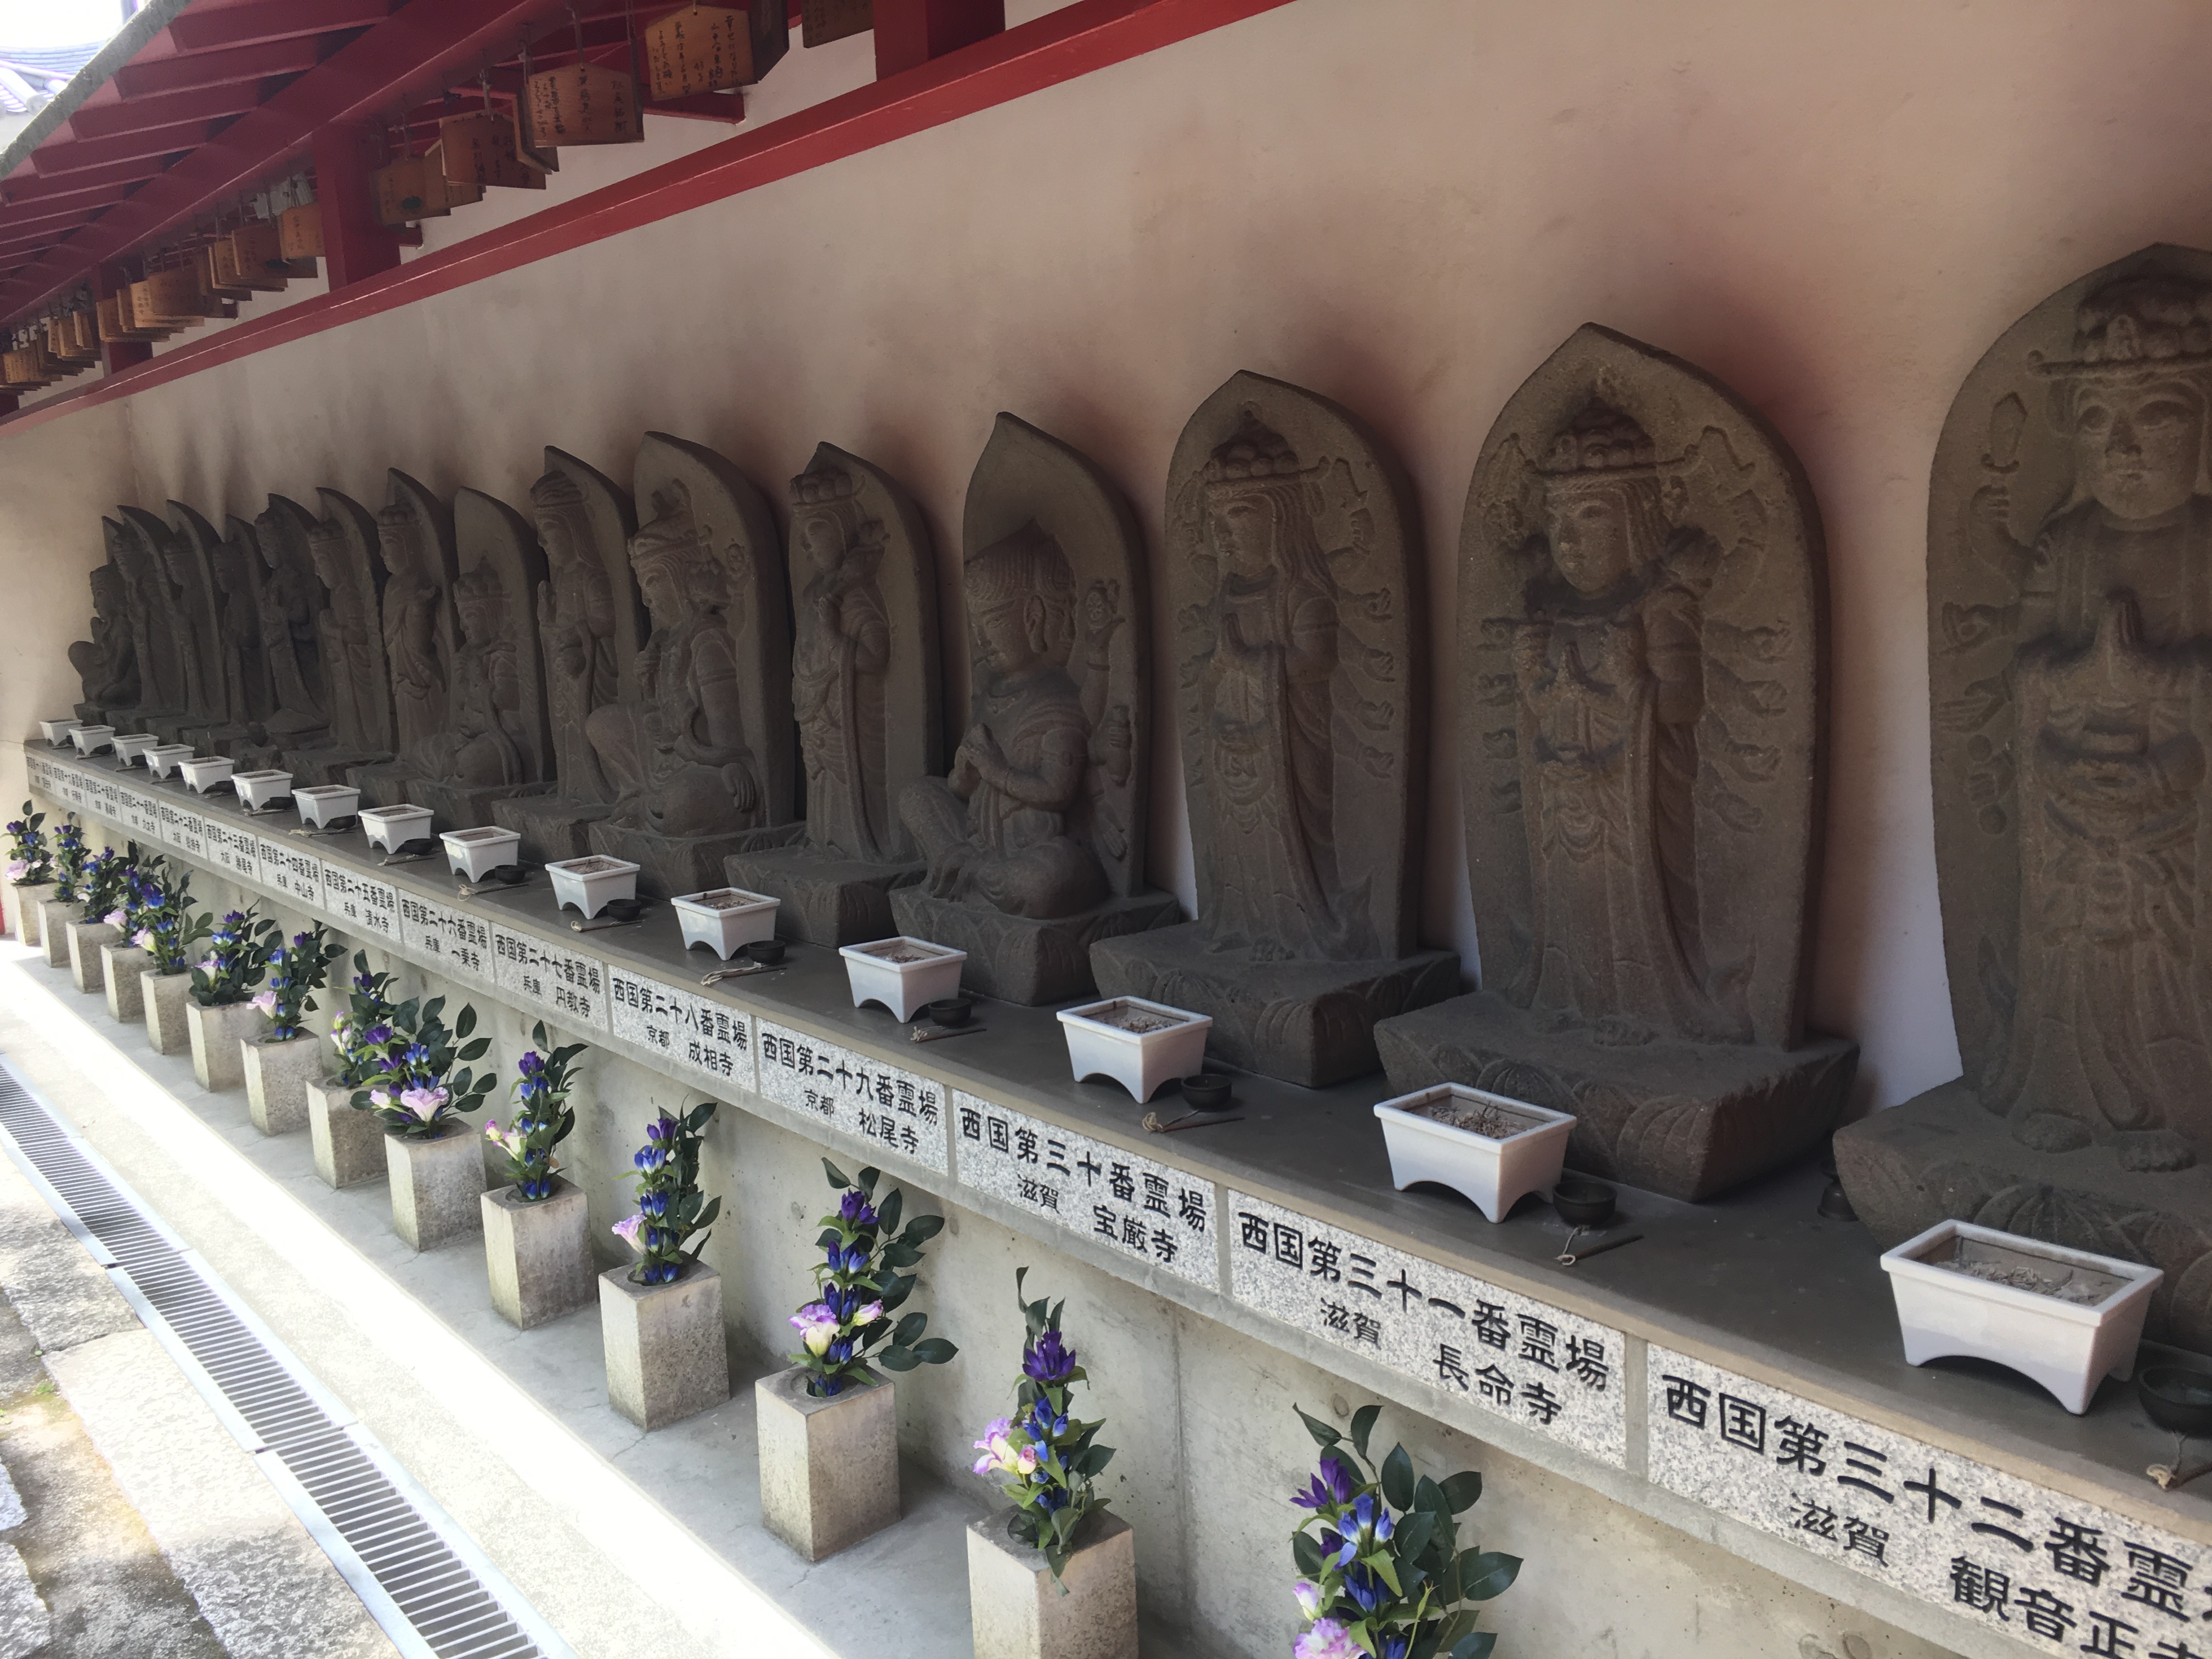 33 statues of the Buddhist goddess of mercy